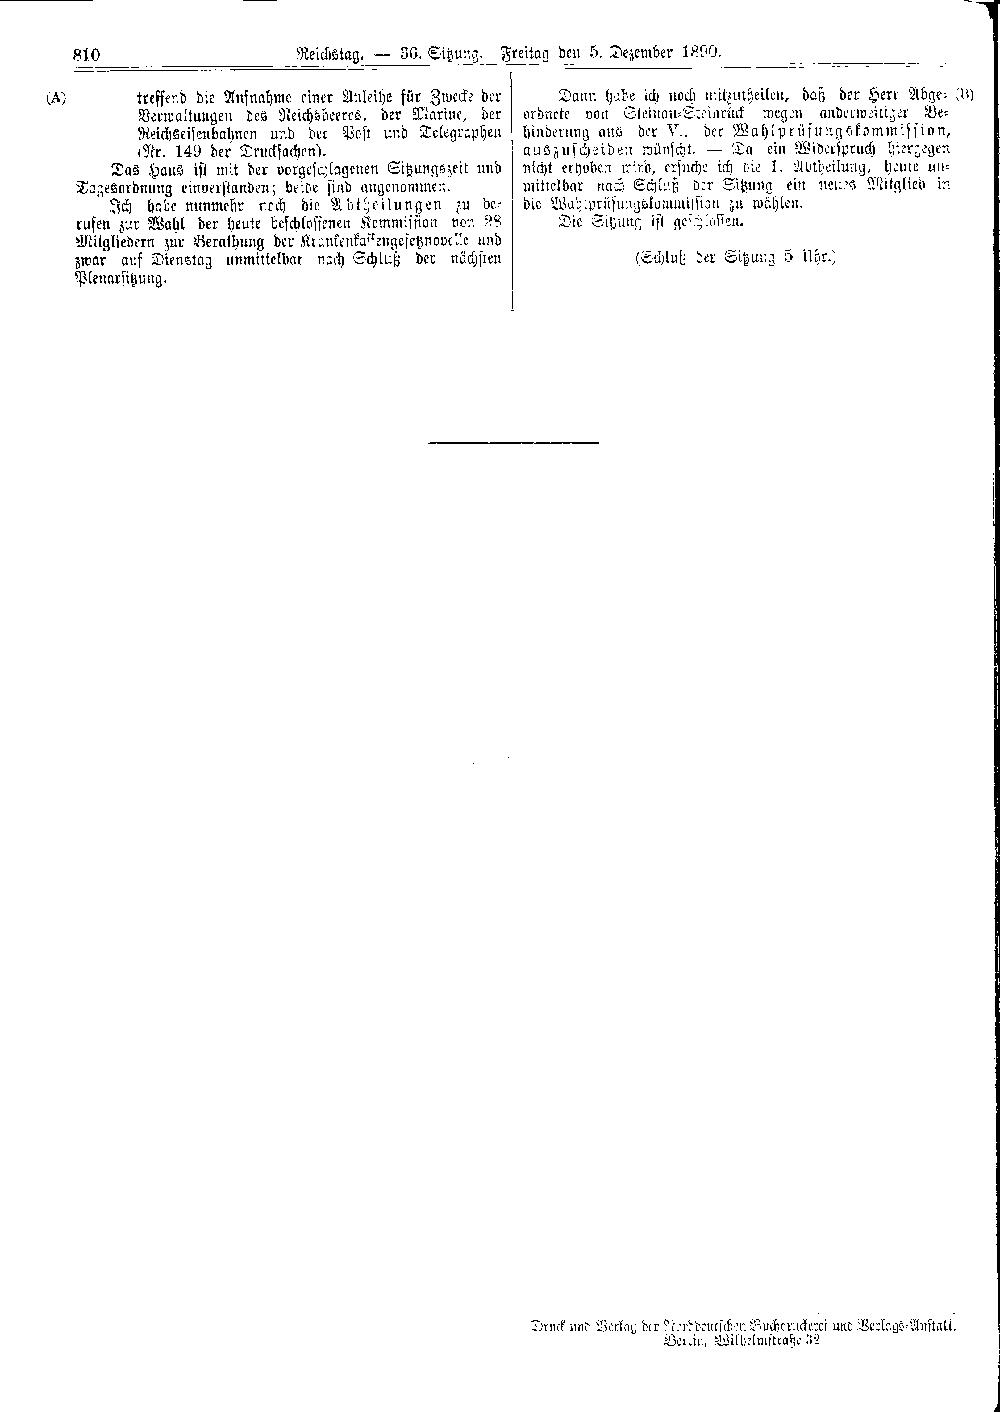 Scan of page 810